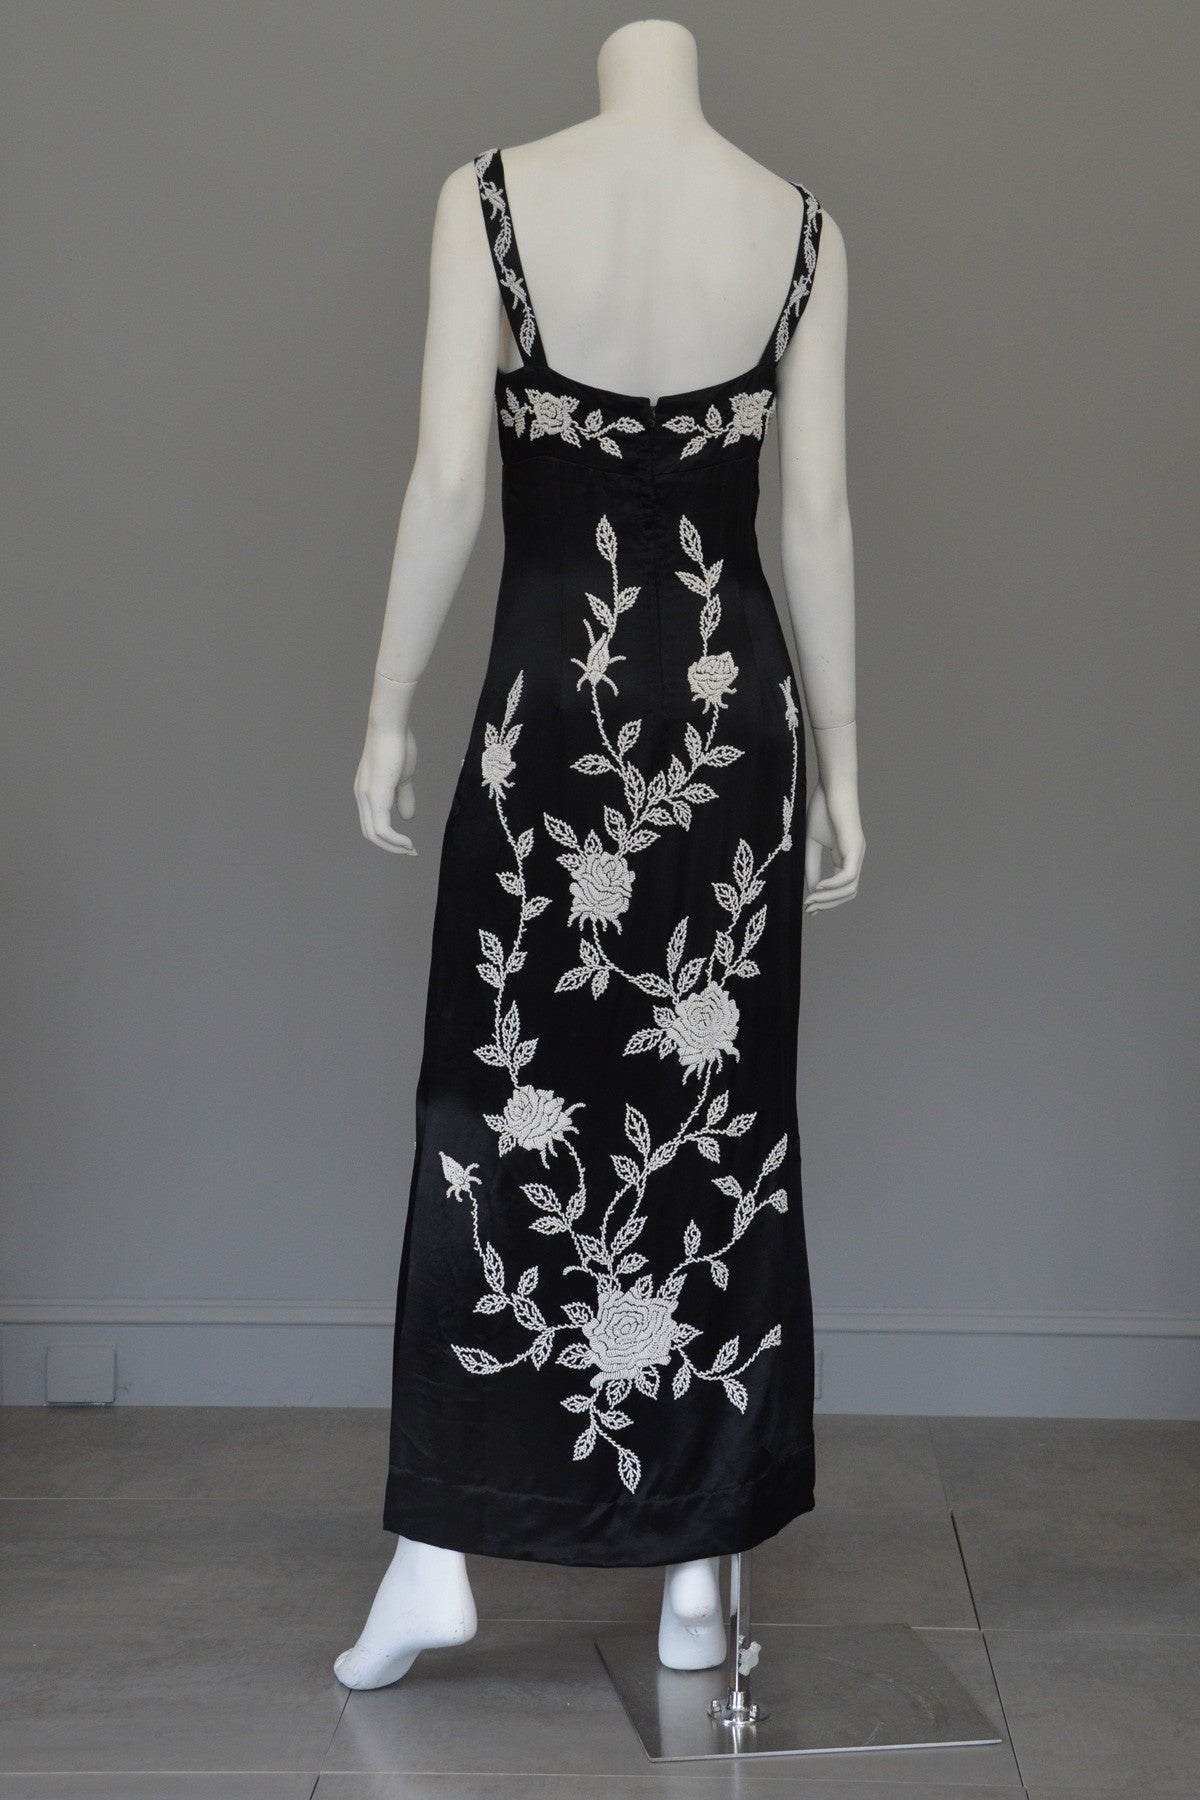 1960's 70's Silk Sheath Dress with Intricate Seed Bead Floral Design